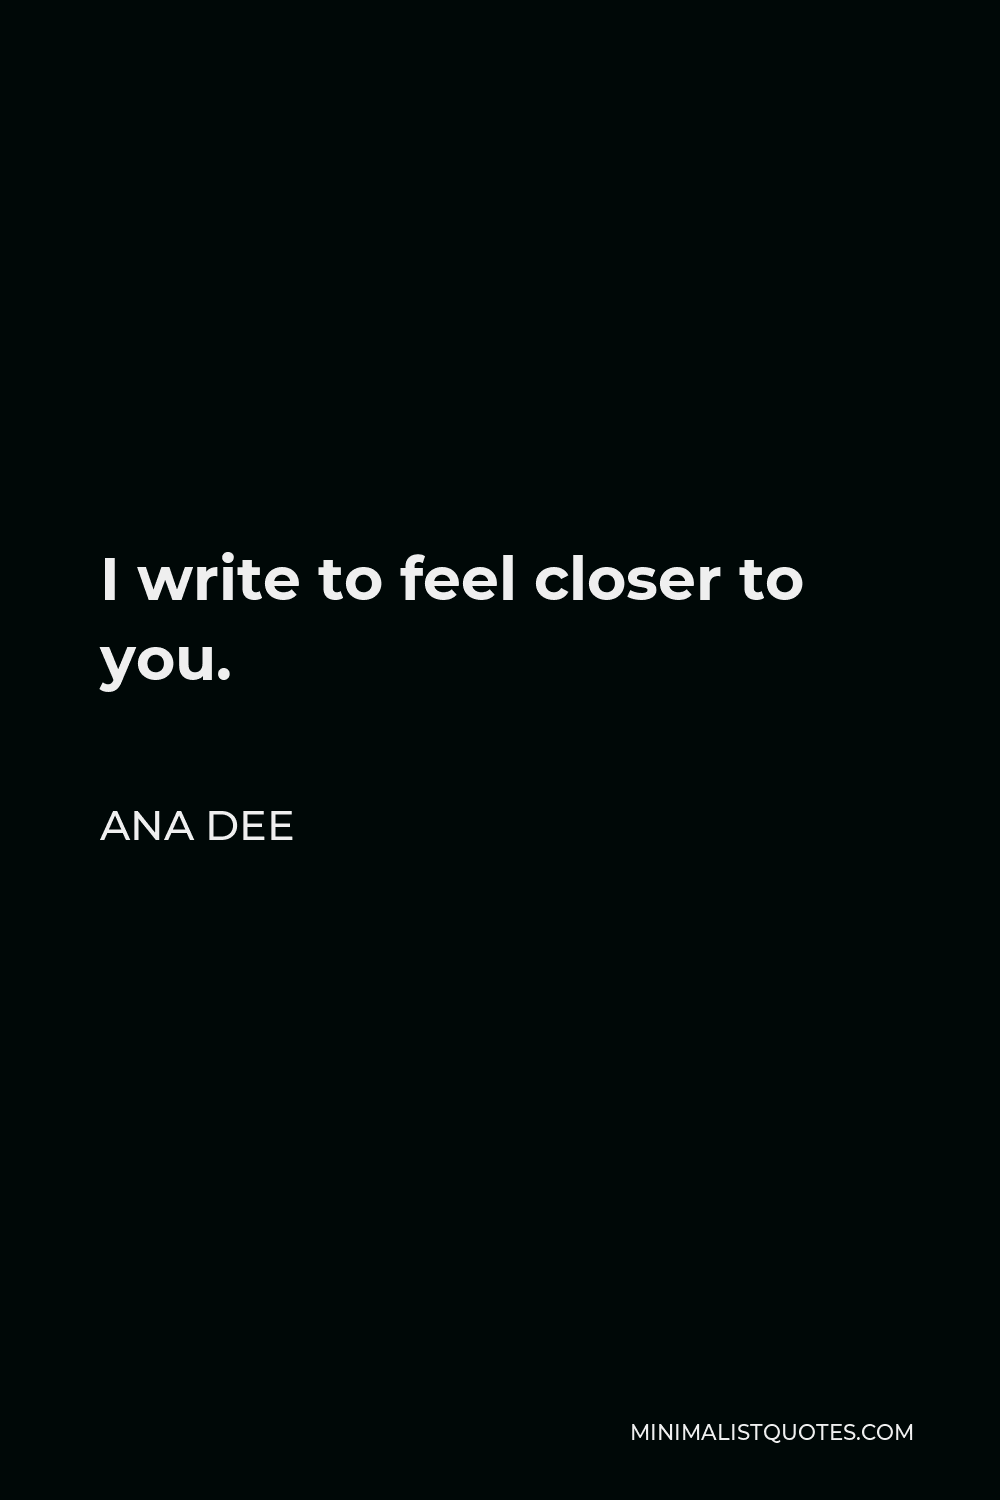 Ana Dee Quote - I write to feel closer to you.